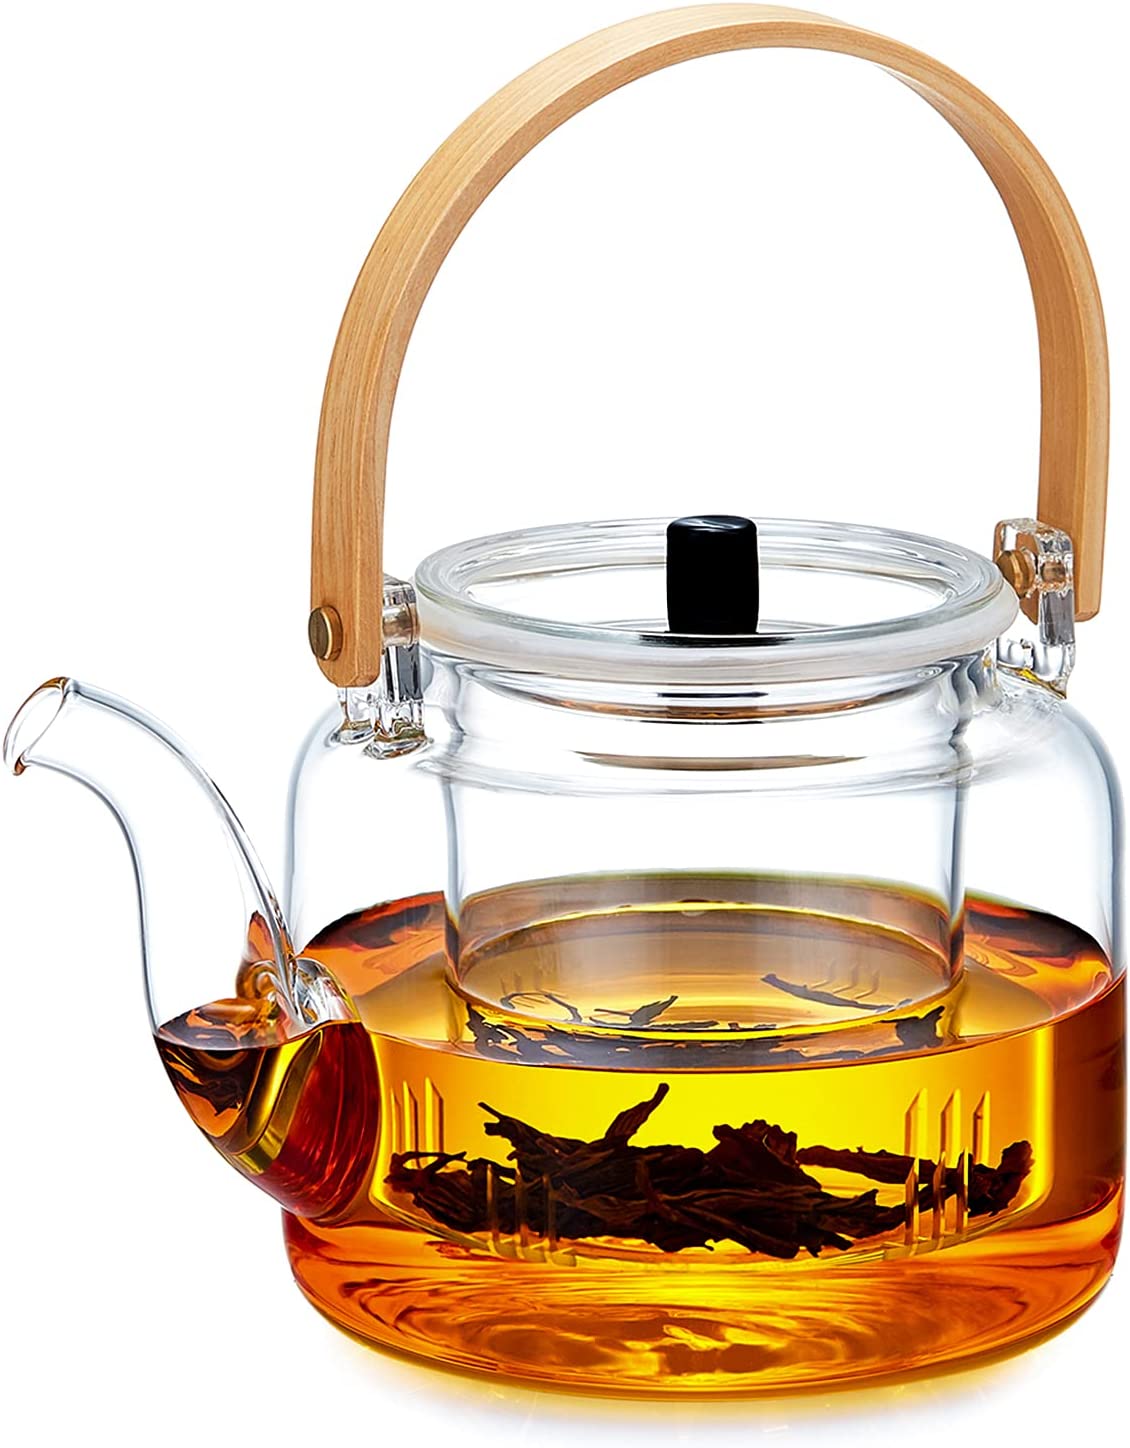 Glass Teapot,1000ml/34oz Borosilicate Glass Teapot with Removable Infuser, Stovetop Safe Tea Kettle,Blooming and Loose Leaf Tea Maker